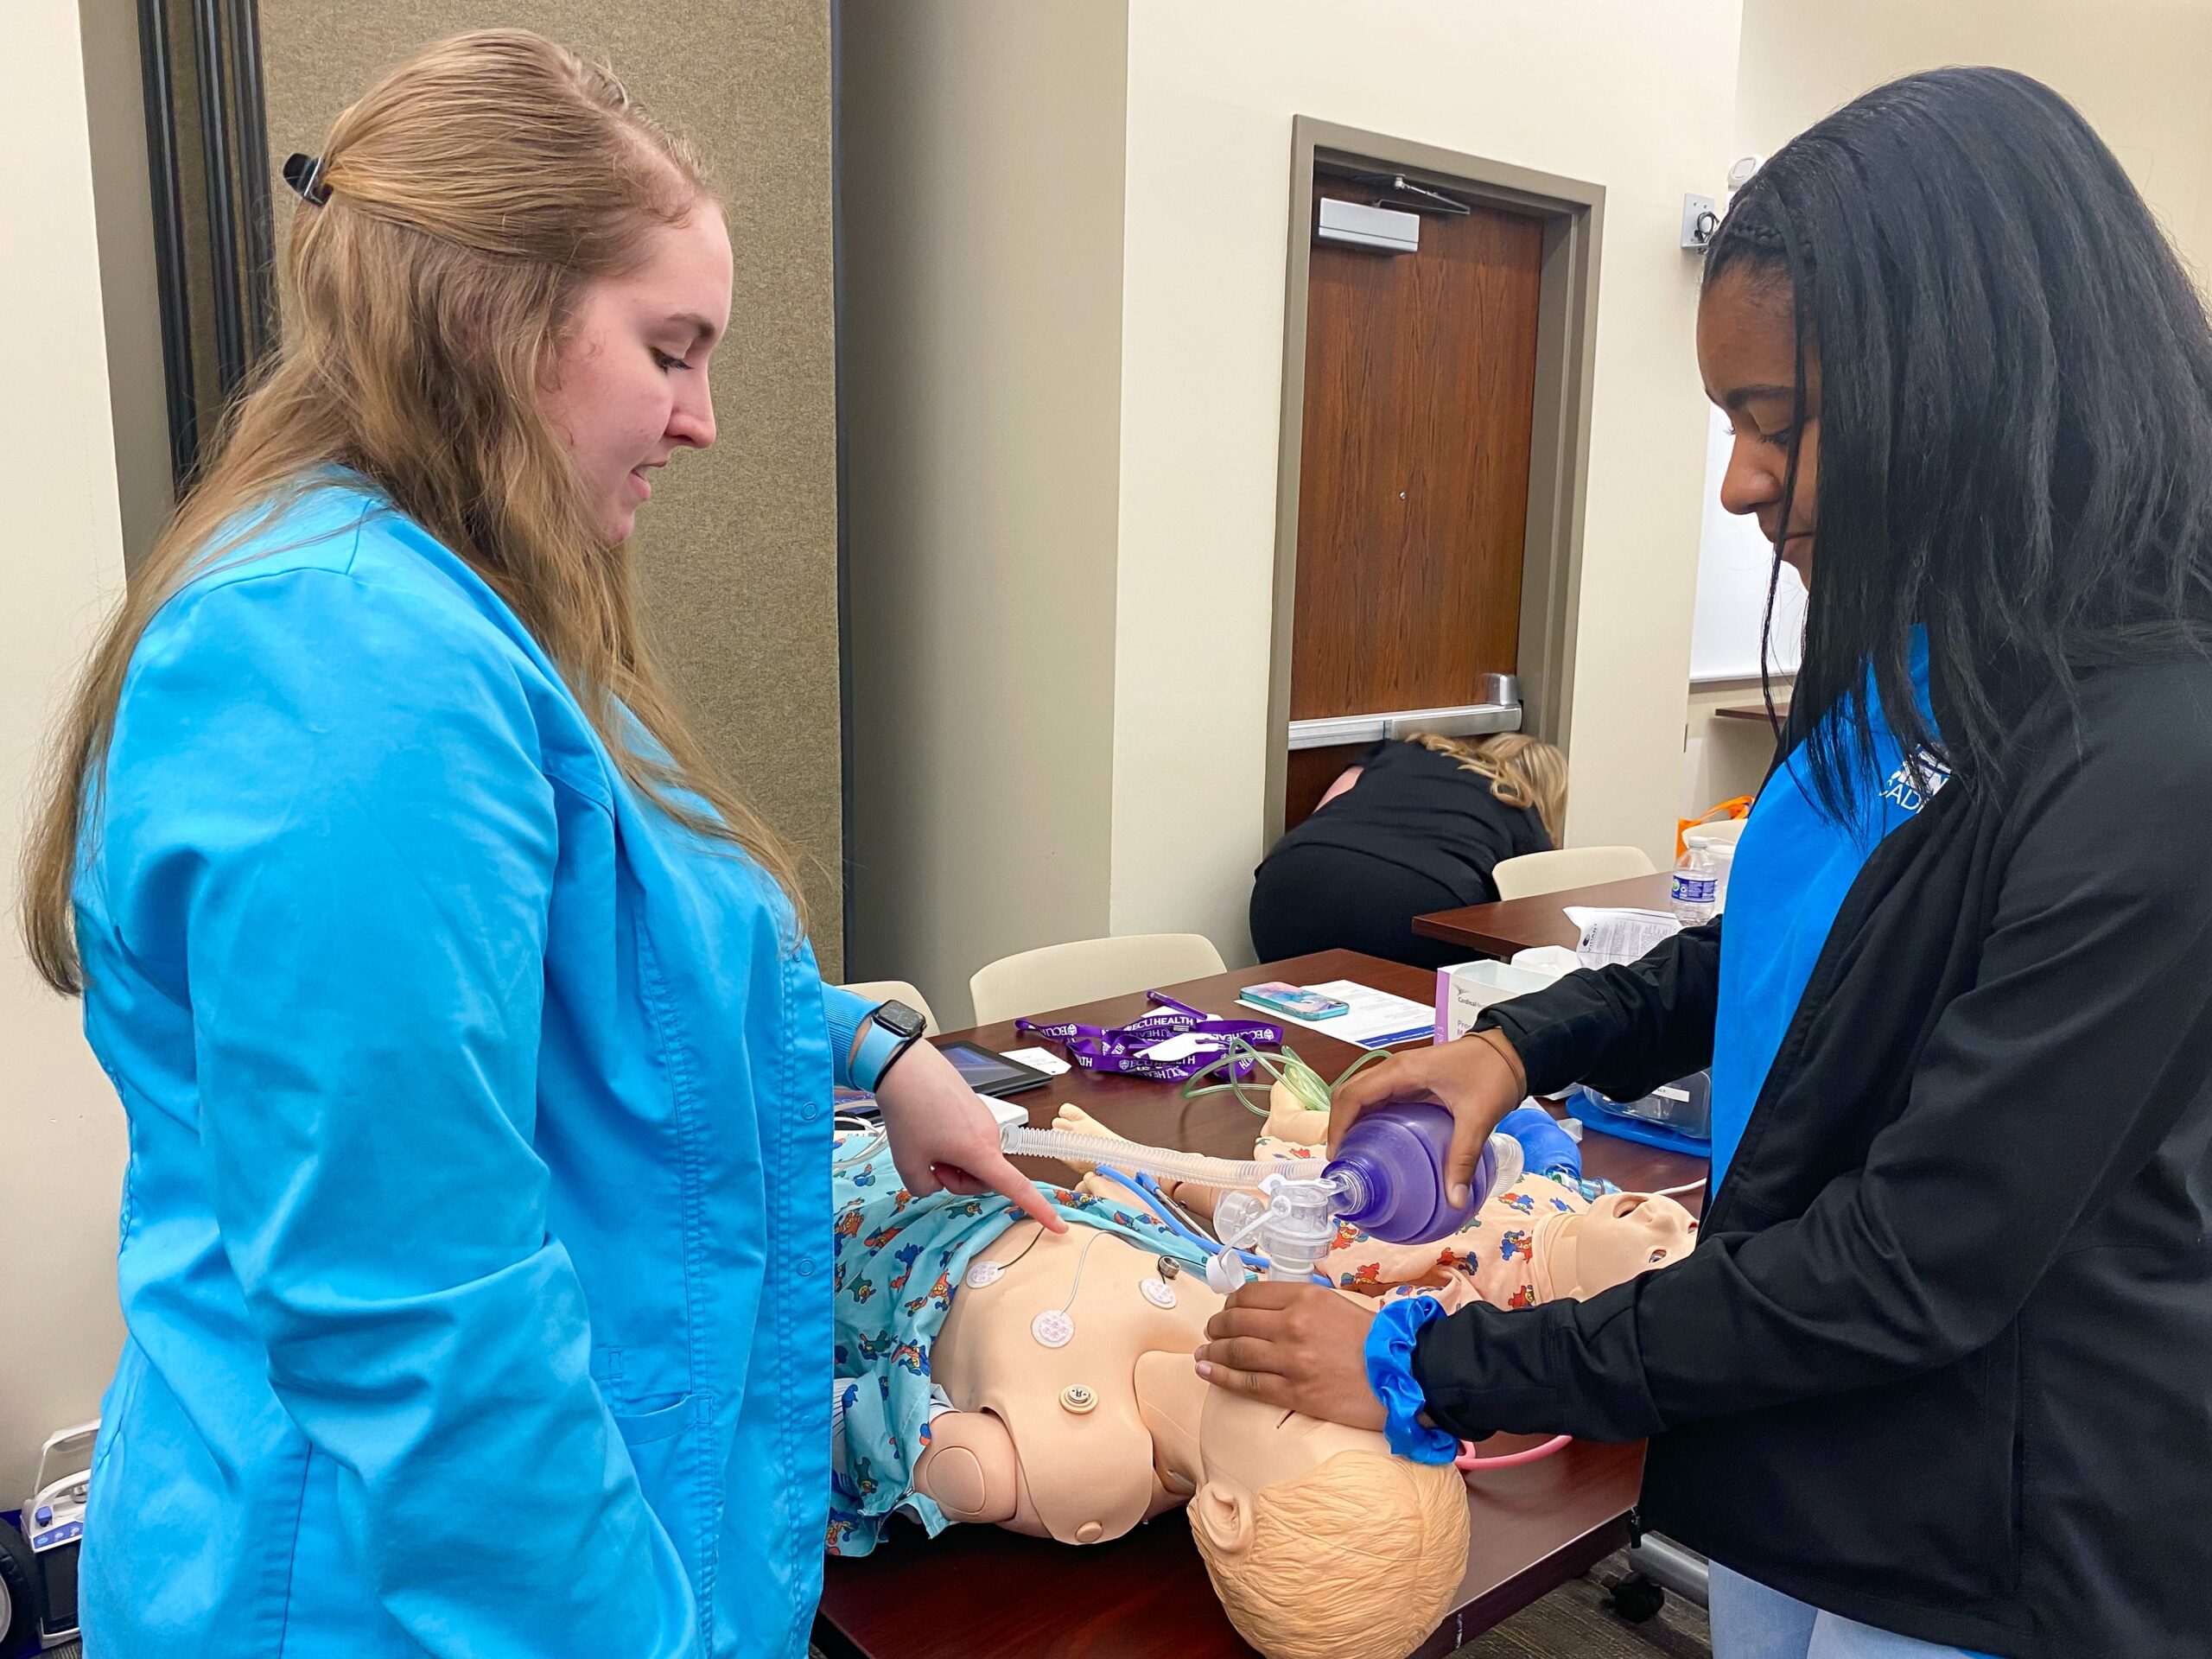 A local student learns about the health care profession from an ECU Health team member during a career fair for Health Sciences Academy students.